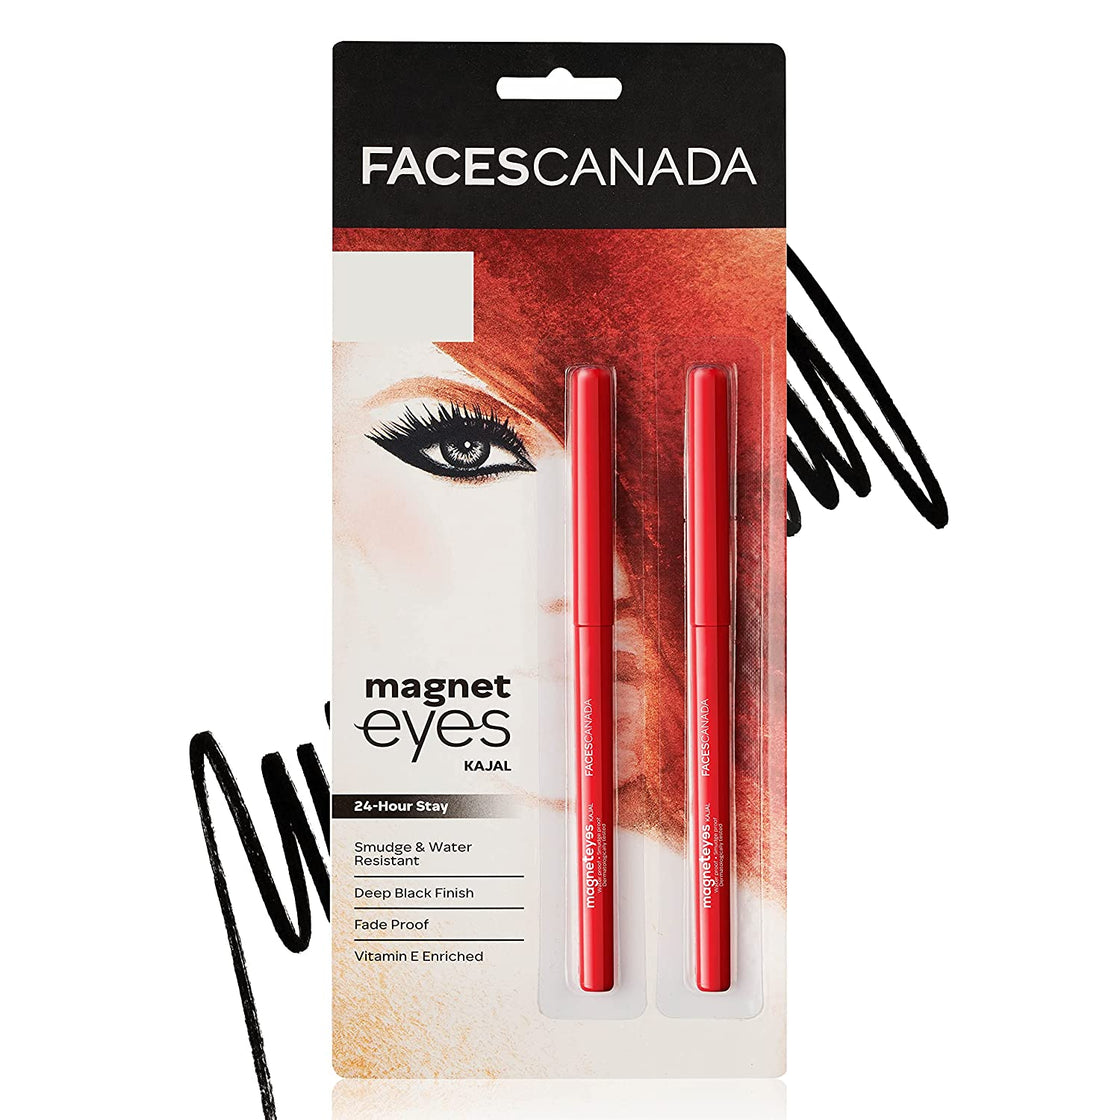 Faces Canada Magneteyes Kajal Duo Pack